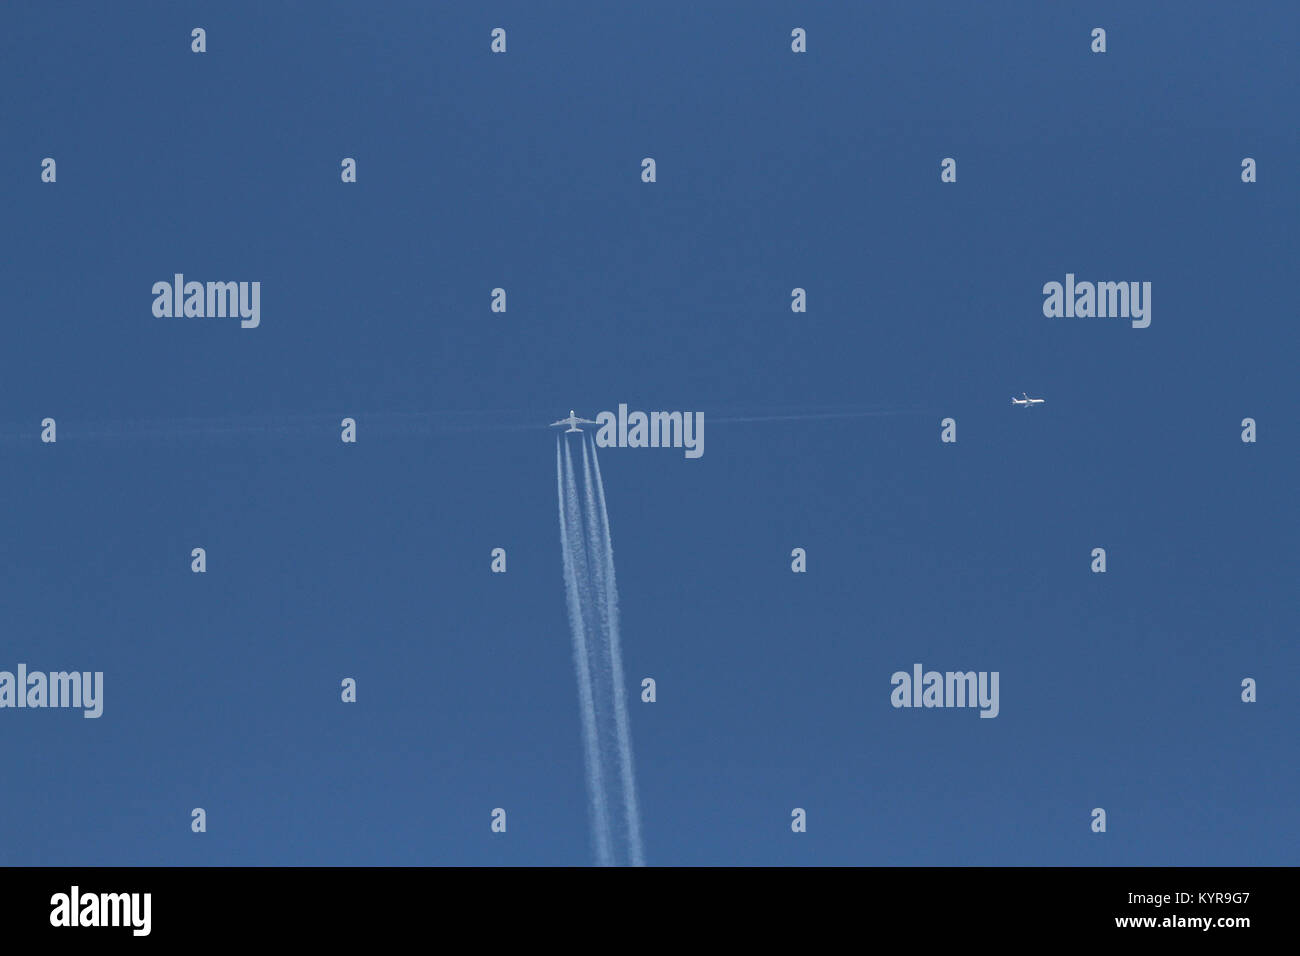 Two jets flight paths crossing high in a blue sky. Stock Photo